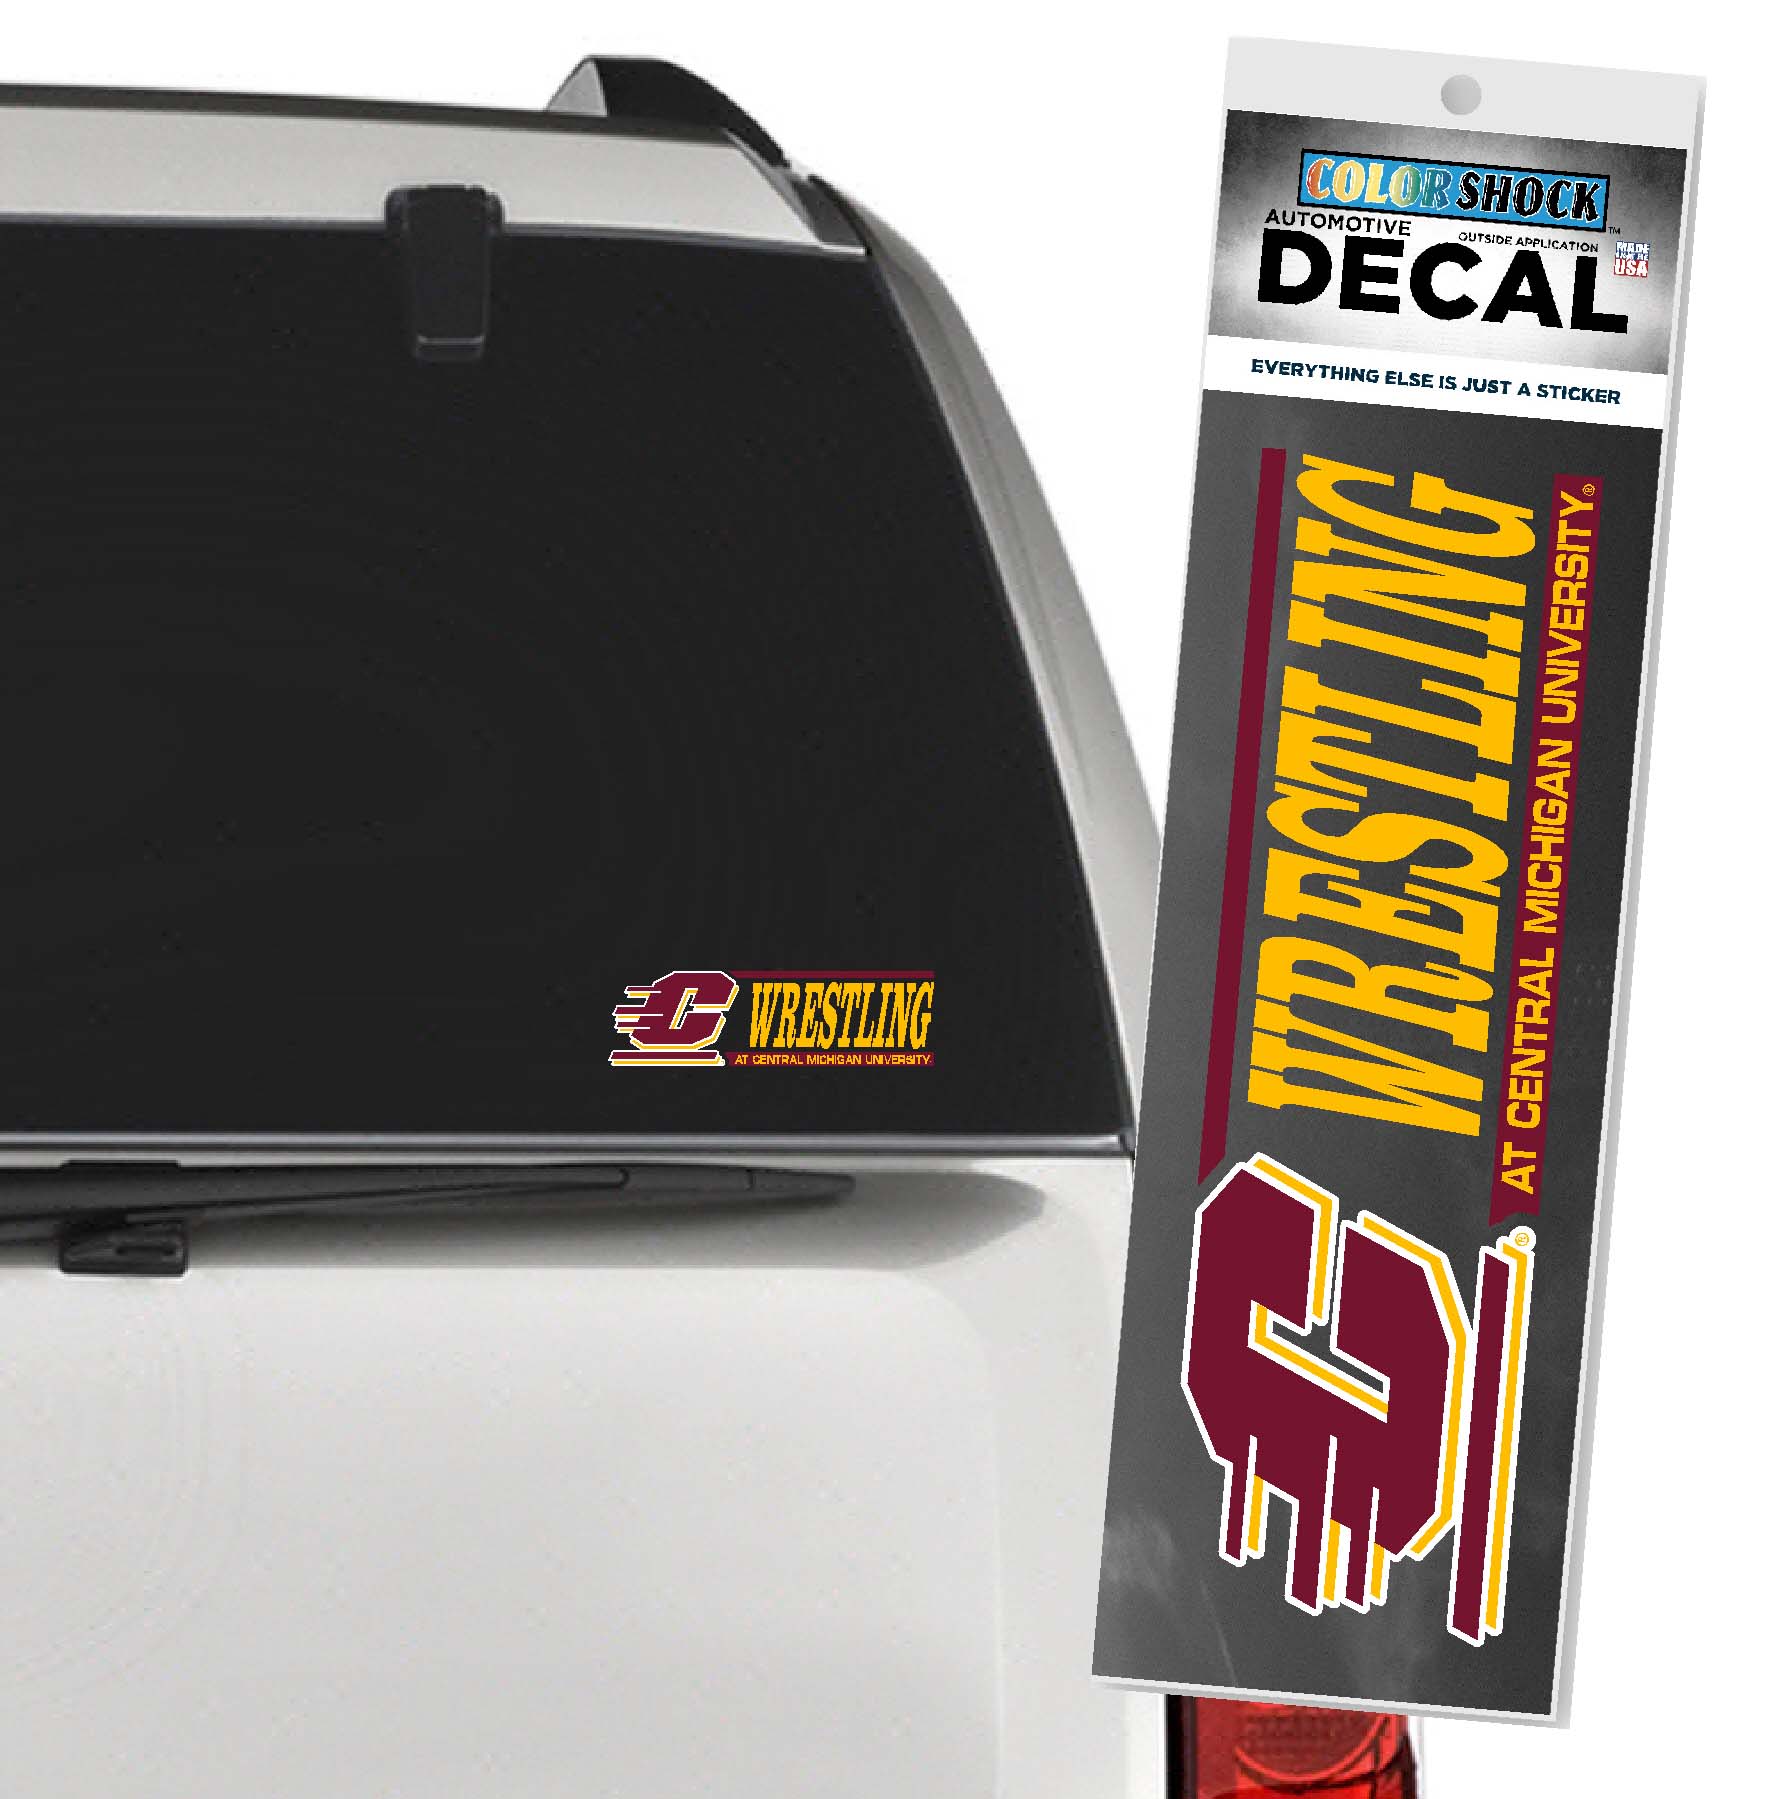 Action C Central Michigan Wrestling Automotive Decal (SKU 1186897217)